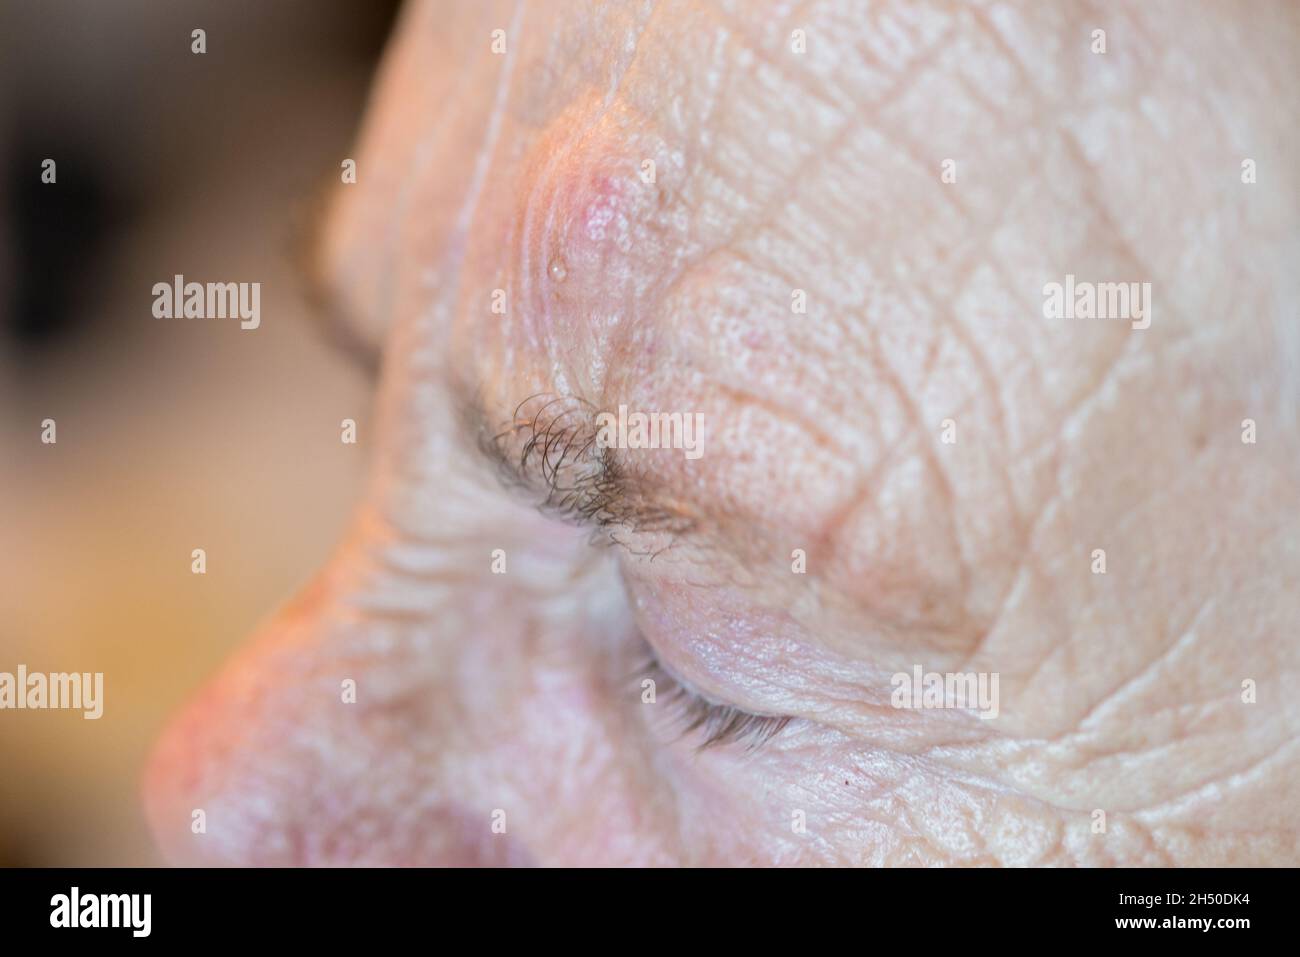 An elderly lady granny gets a medical treatment with needle injection syringe in the forehead with wrinkles , Germany Stock Photo